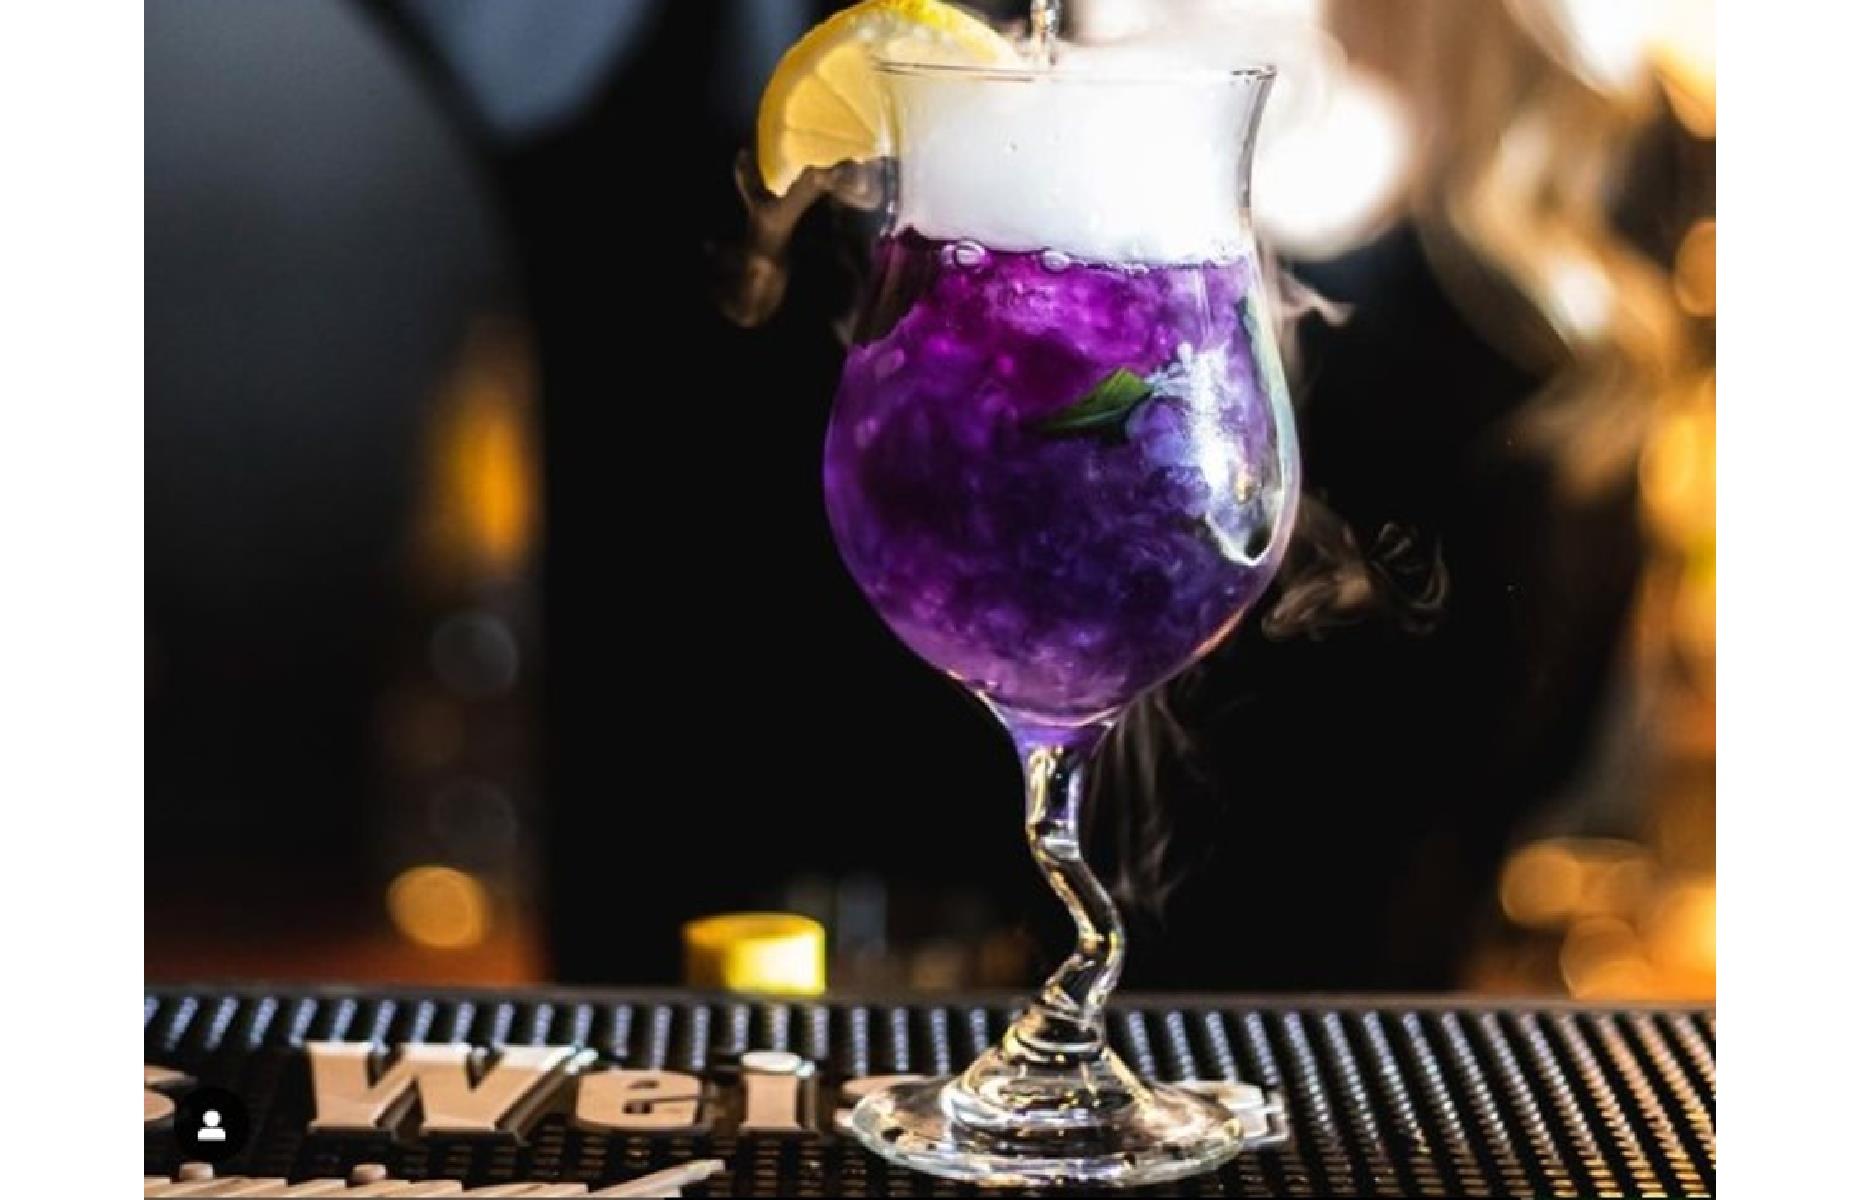 <p>Ask the bartender for an Accio Surprisō at <a href="https://www.thesorcerersbar.com/">The Sorcerer's Bar</a> in Adelaide, Australia, and who knows what you'll get – they magic up a surprise cocktail every time. Several other Harry Potter-themed drinks are served at this tiny, sorcery-themed spot, including Half Blood Sangria and Polyjuice Potion, which comes presented in a cauldron.</p>